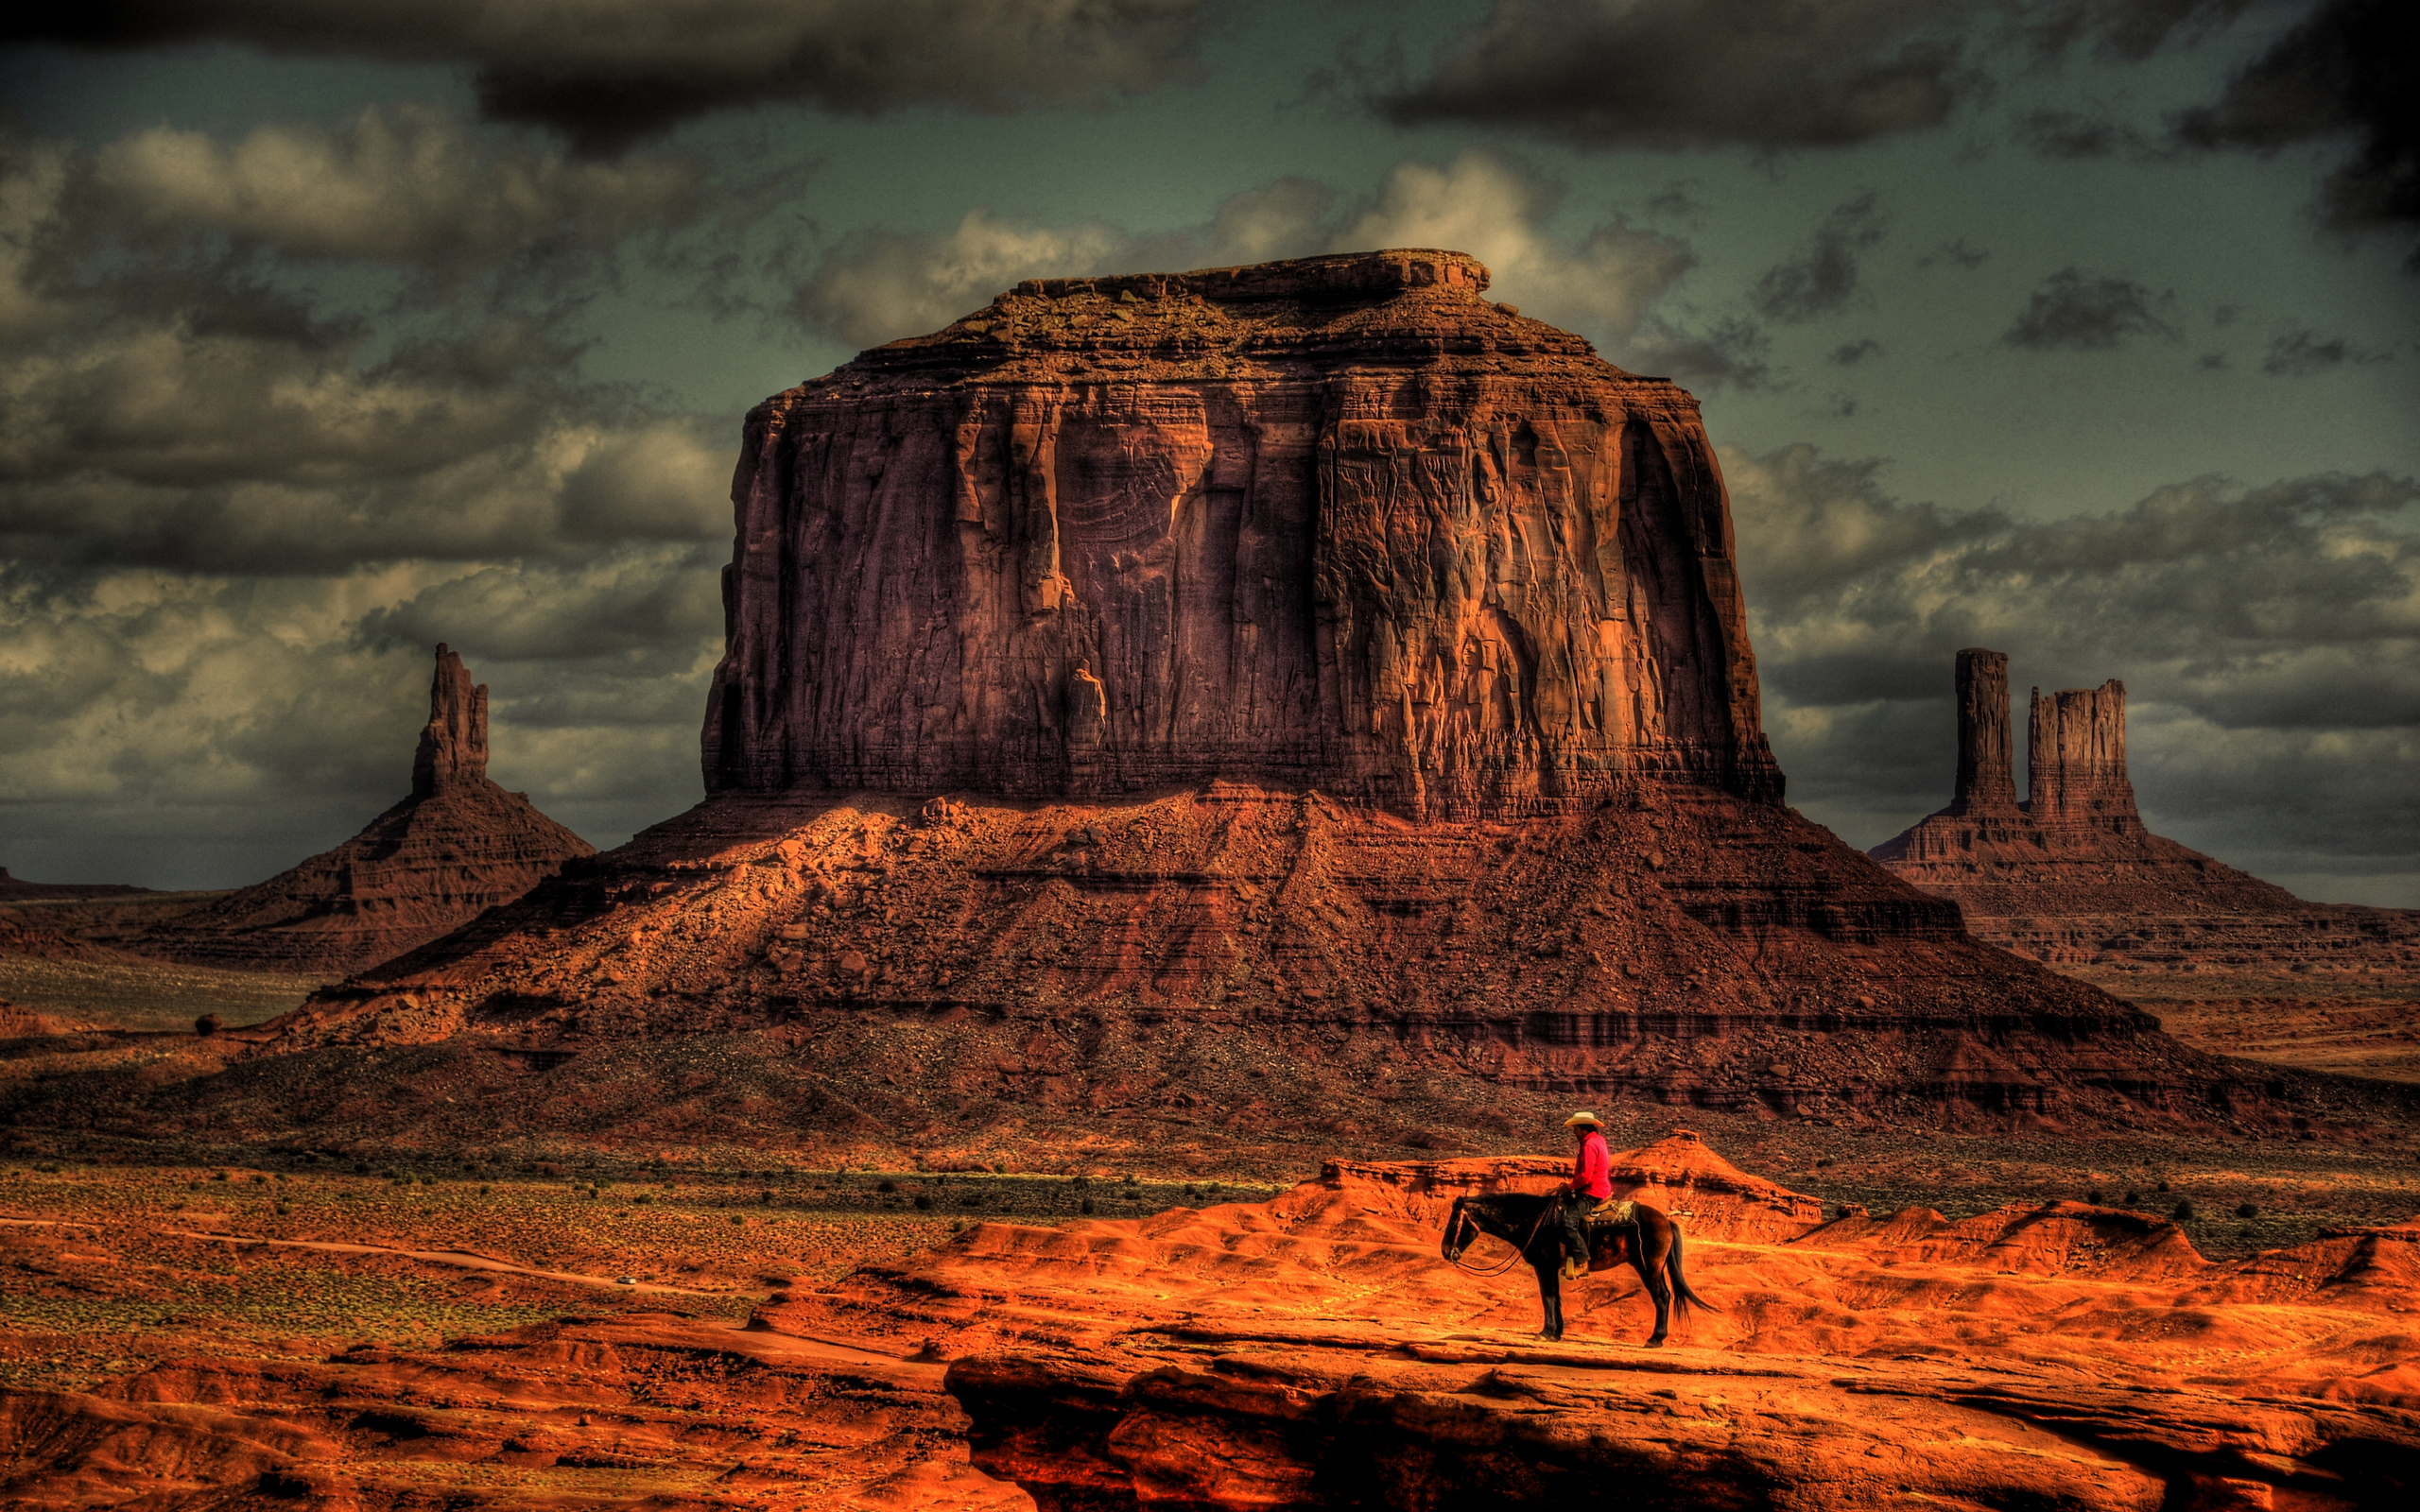 John Ford's Point, Monument Valley scene featuring a majestic horse in nature.